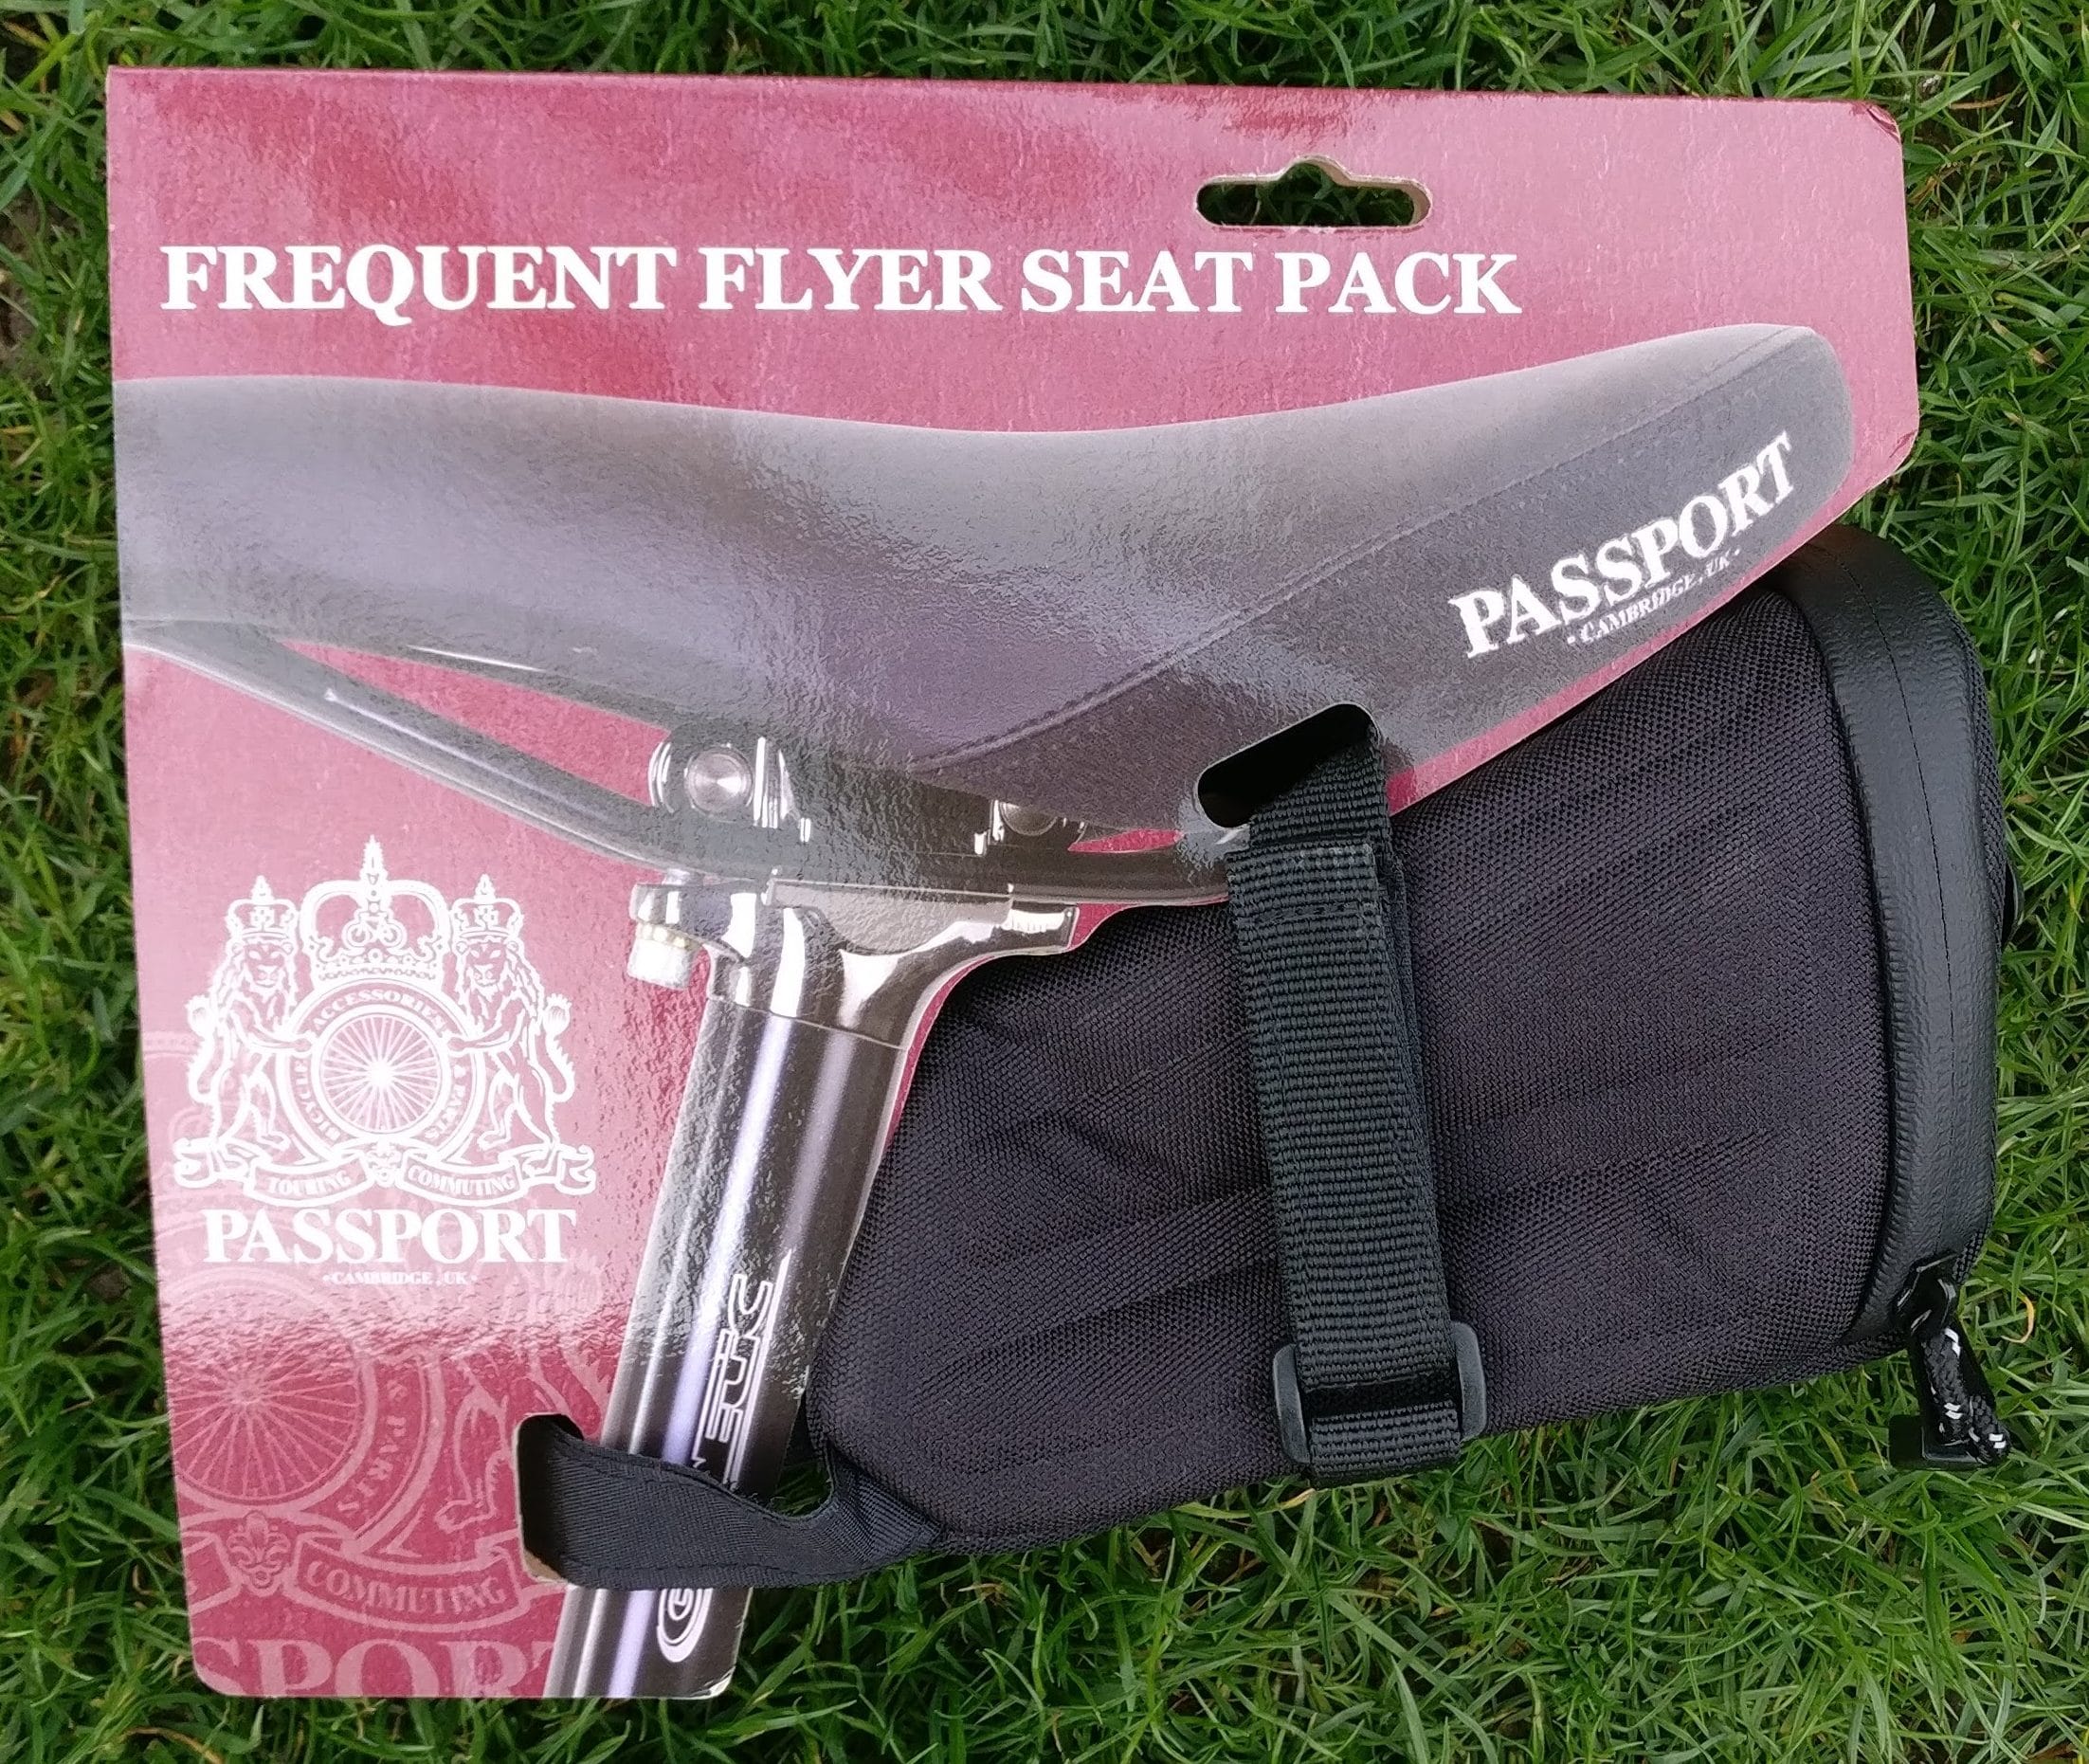 Passport Frequent Flyer Seat Pack